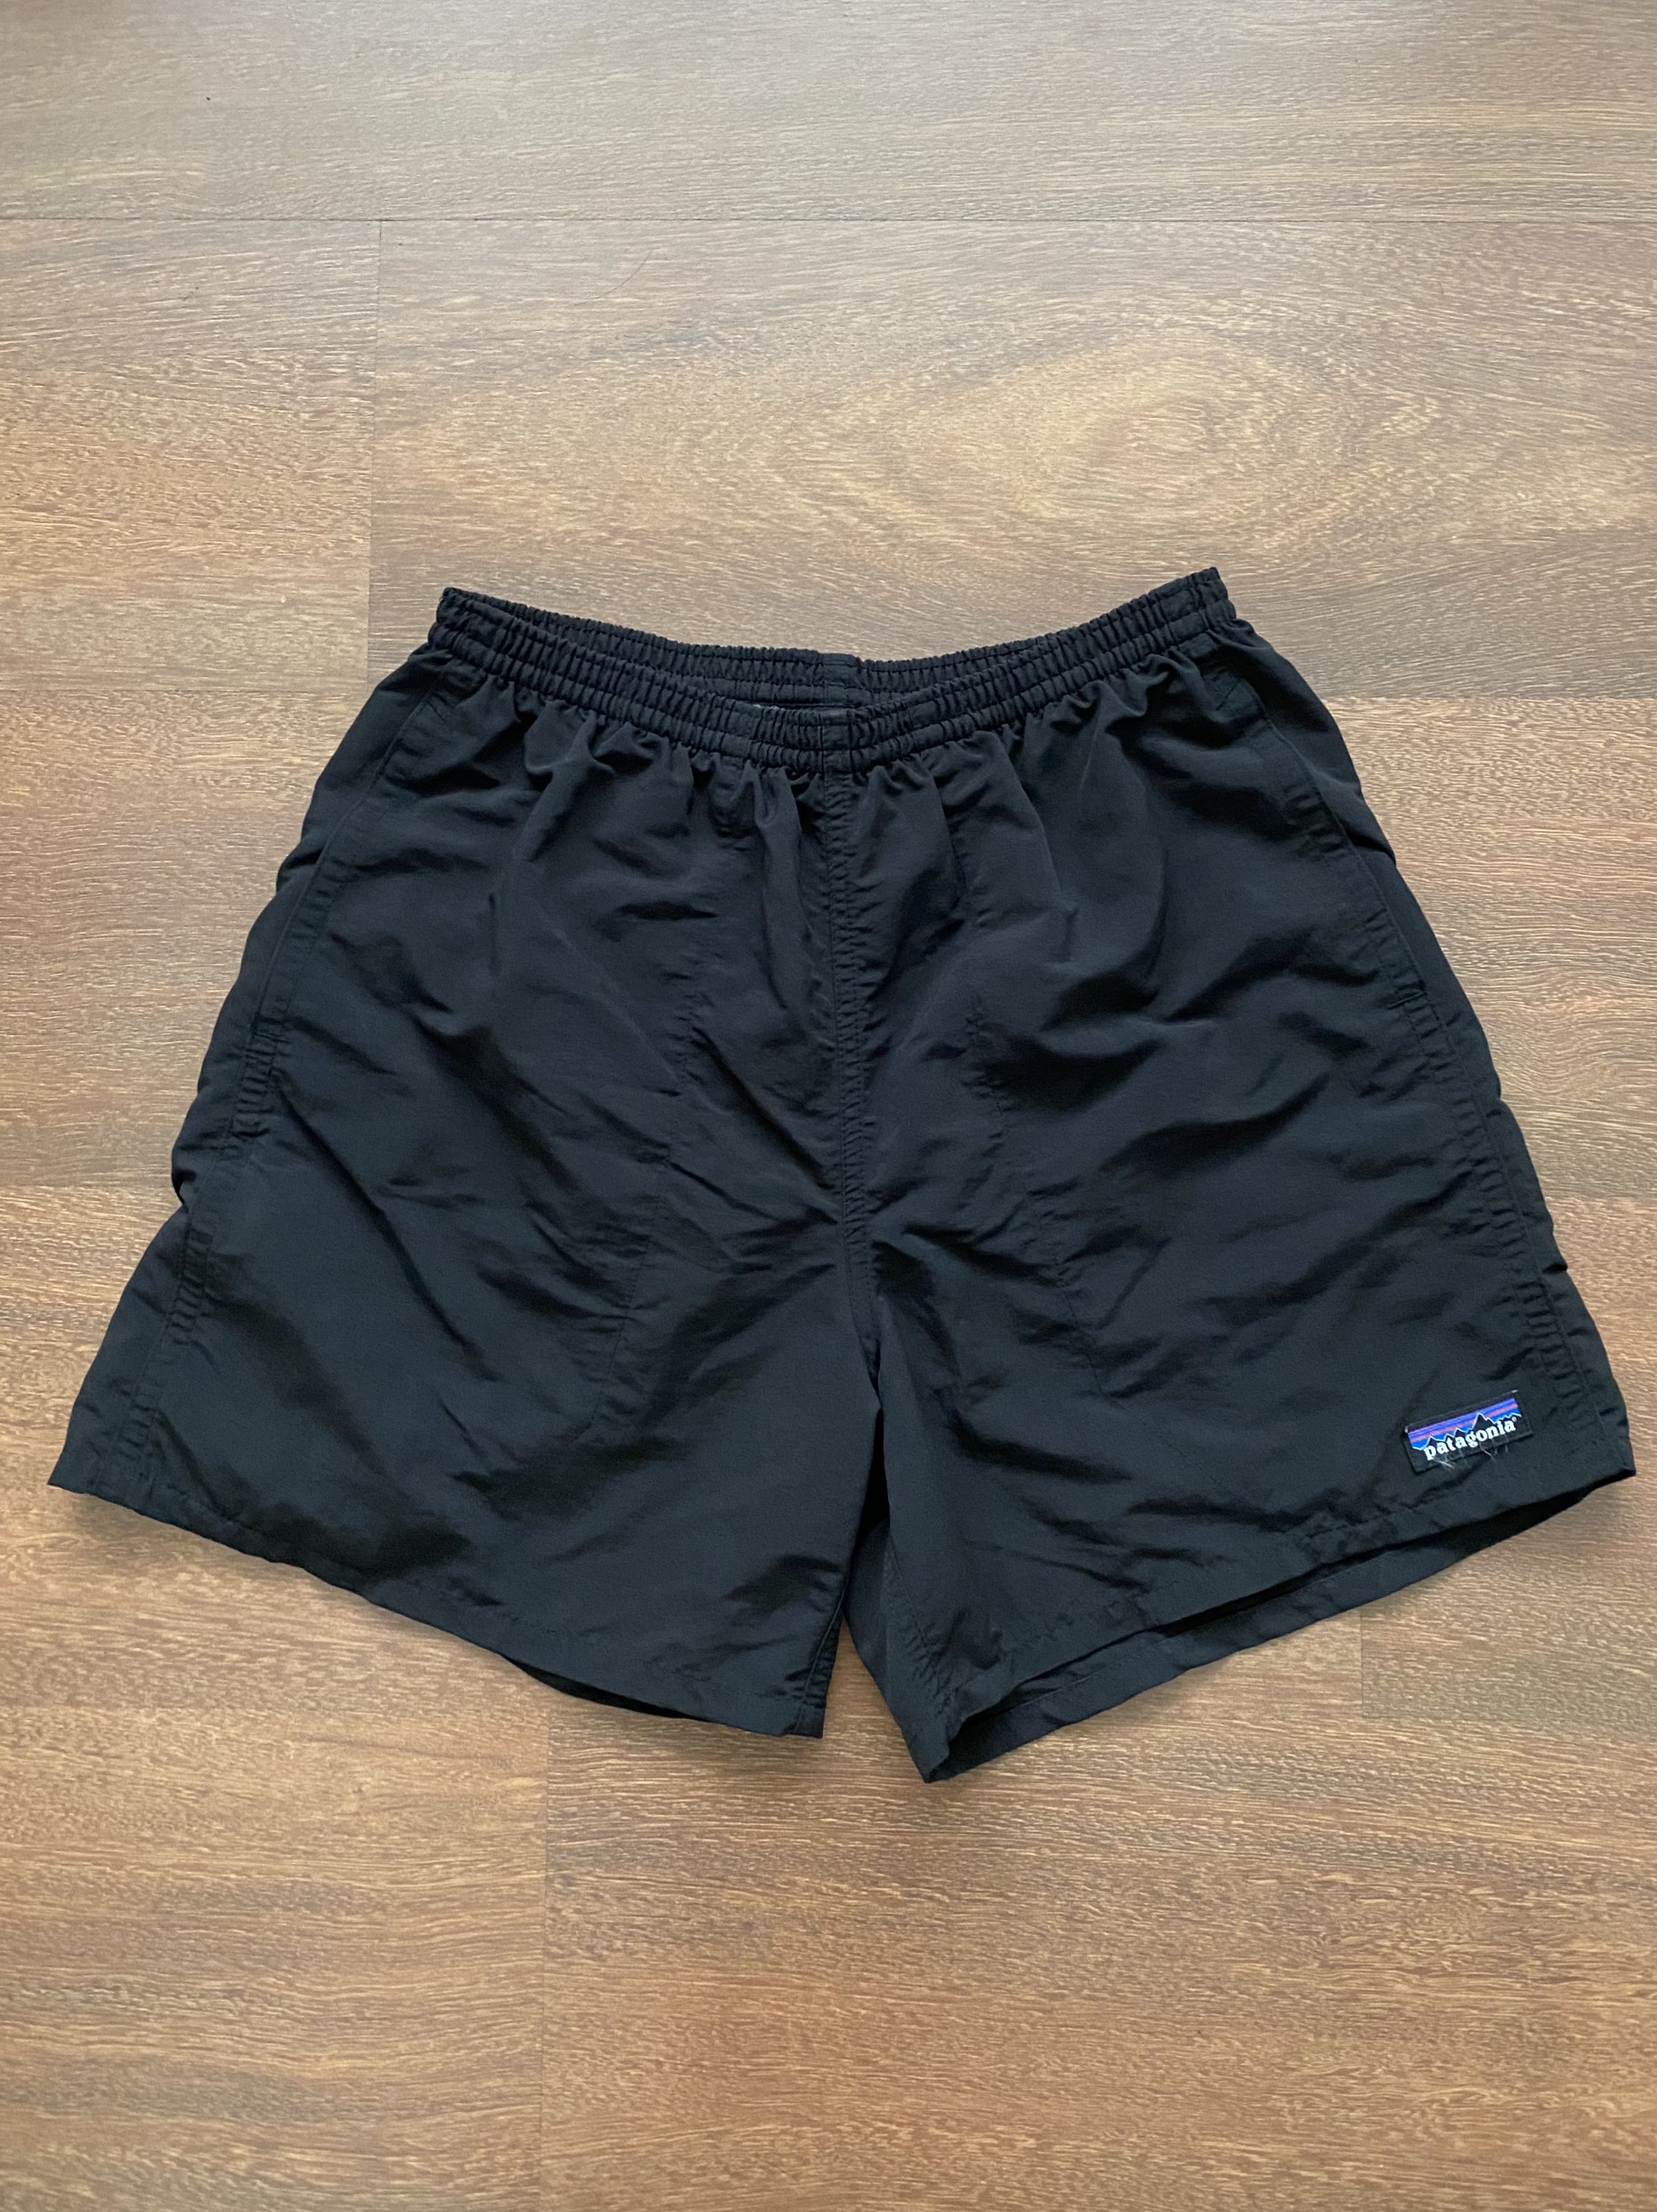 Patagonia 5 inch Baggies, Men's Fashion, Bottoms, Jeans on Carousell